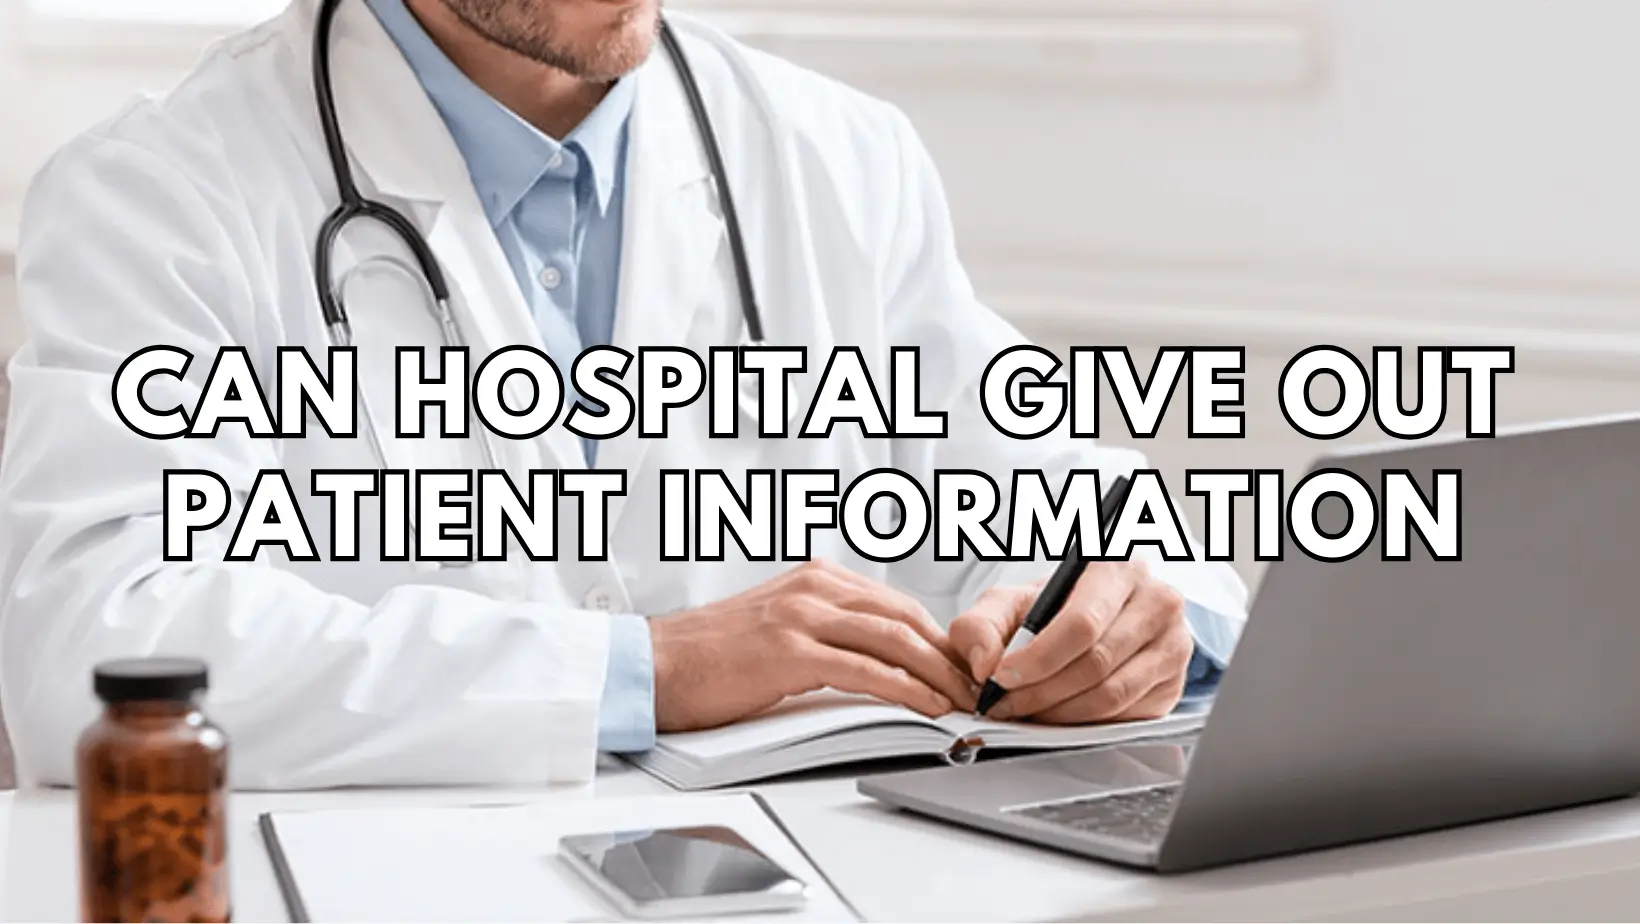 can hospital give out patient information featured image